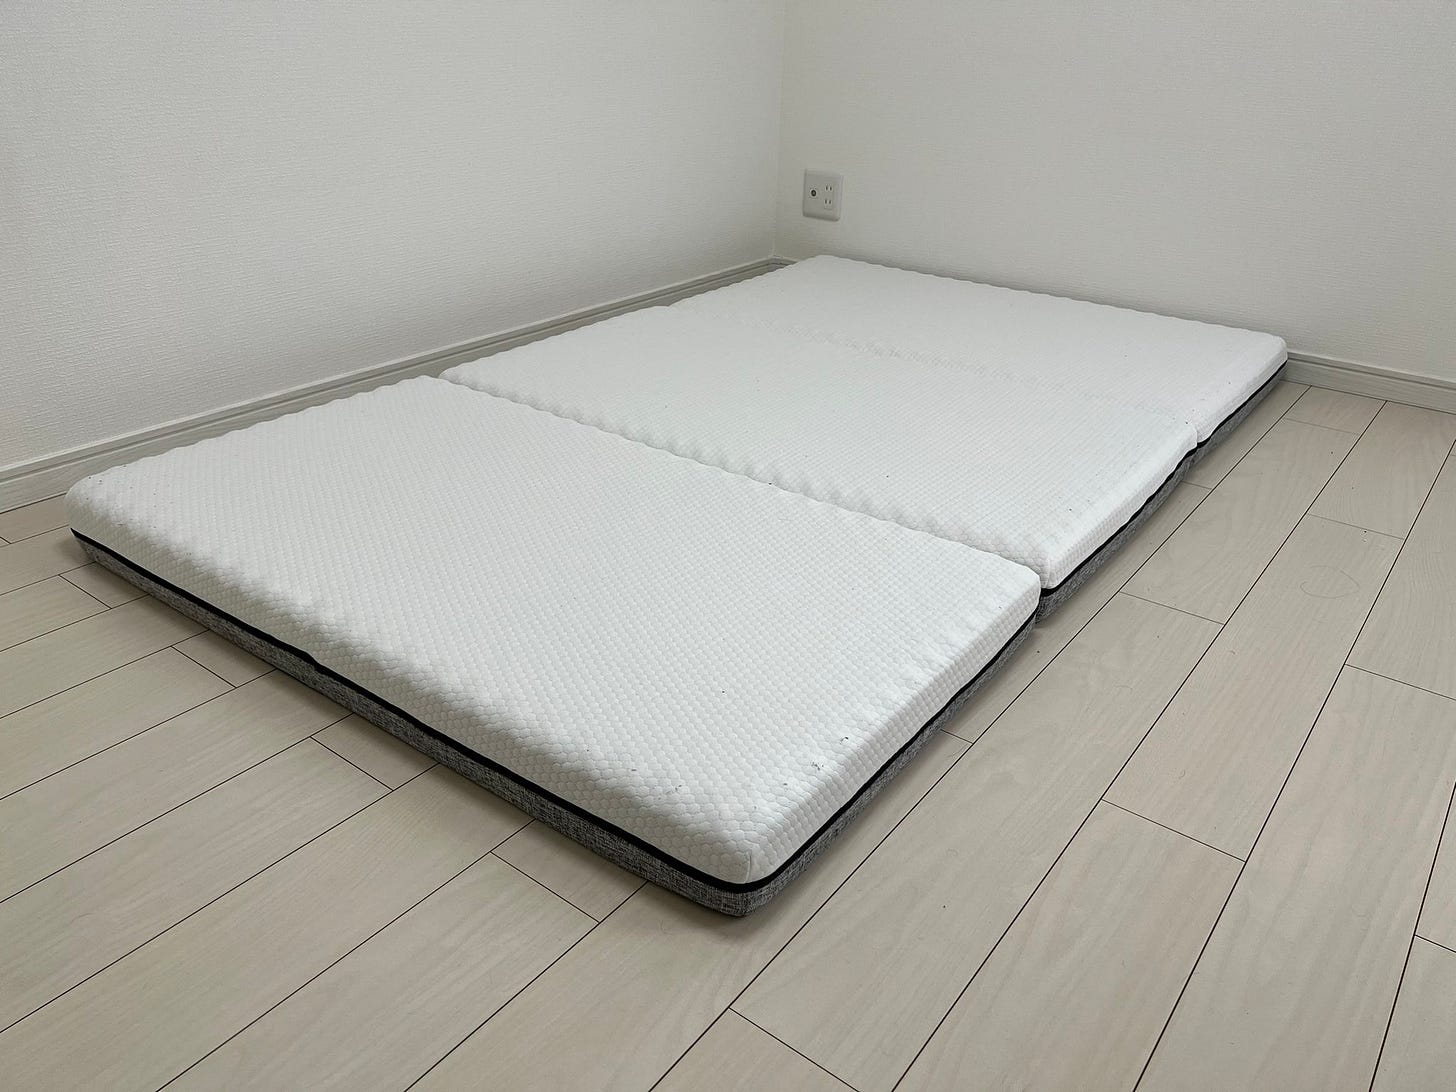 A photo of a folding mattress in a Japanese bedroom.